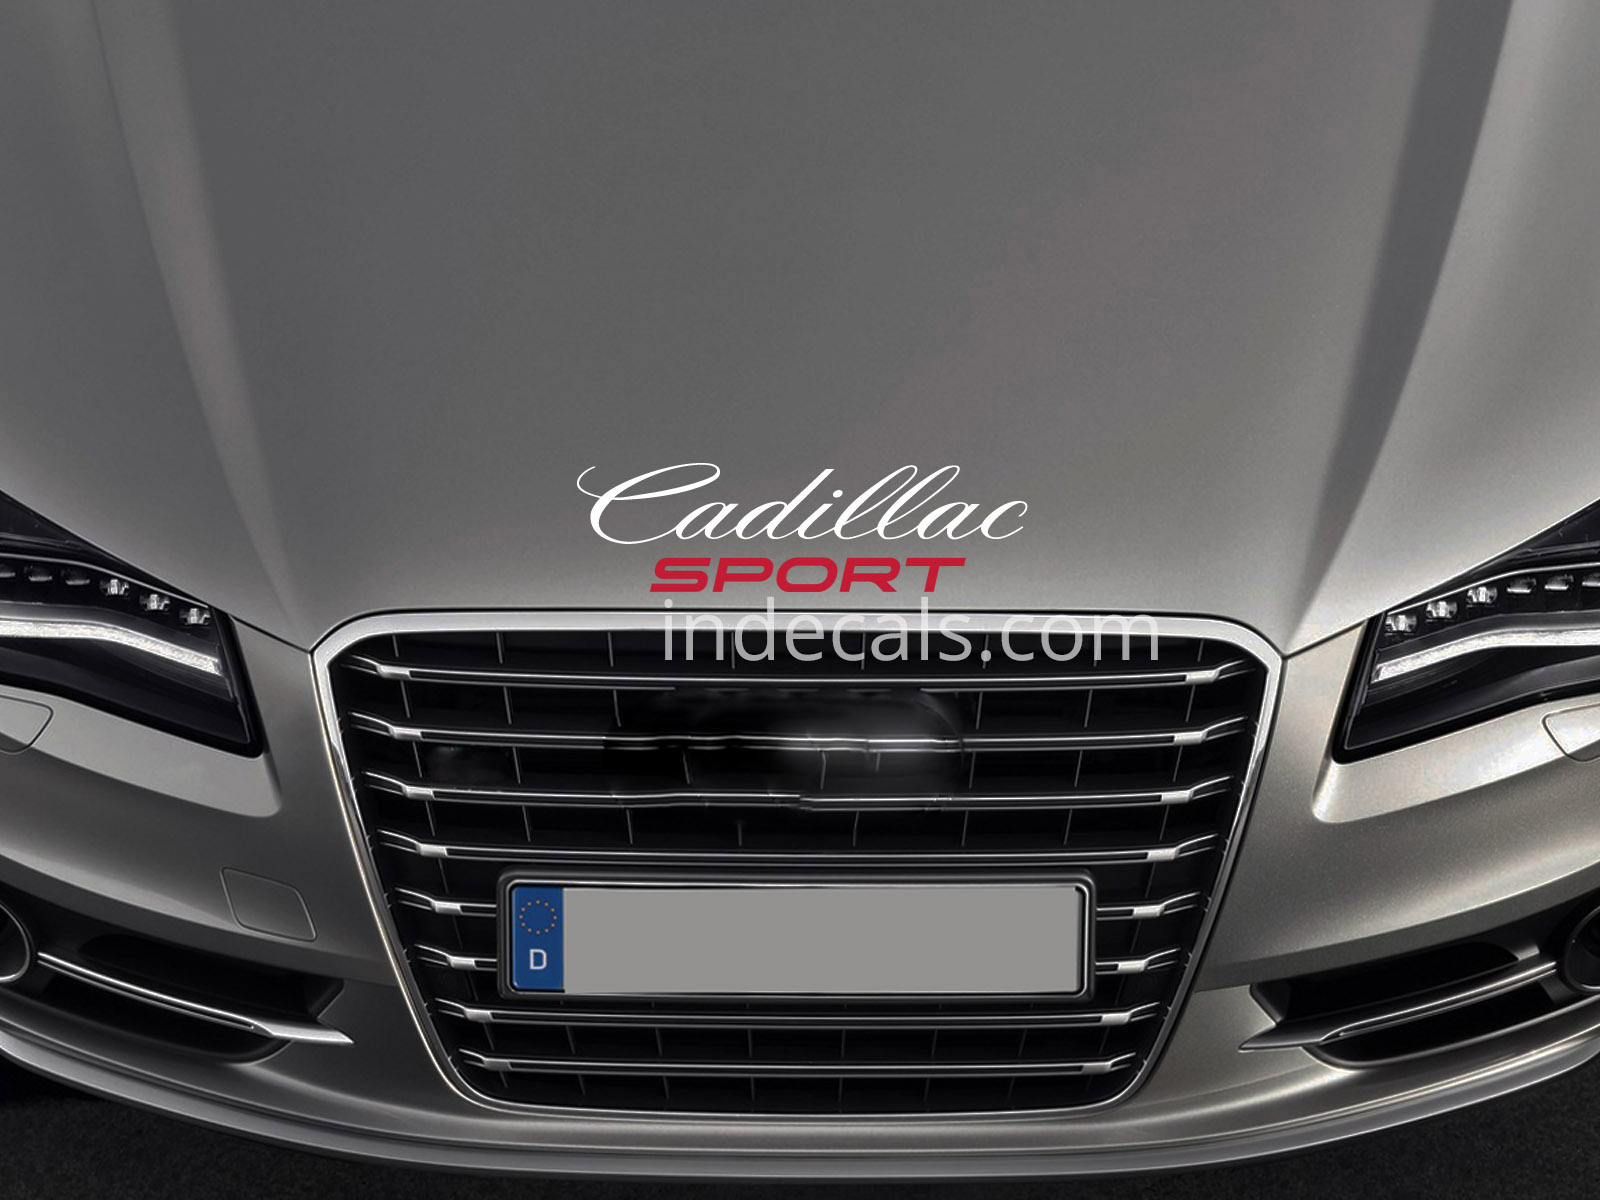 1 x Cadillac Sport Sticker for Bonnet - White & Red